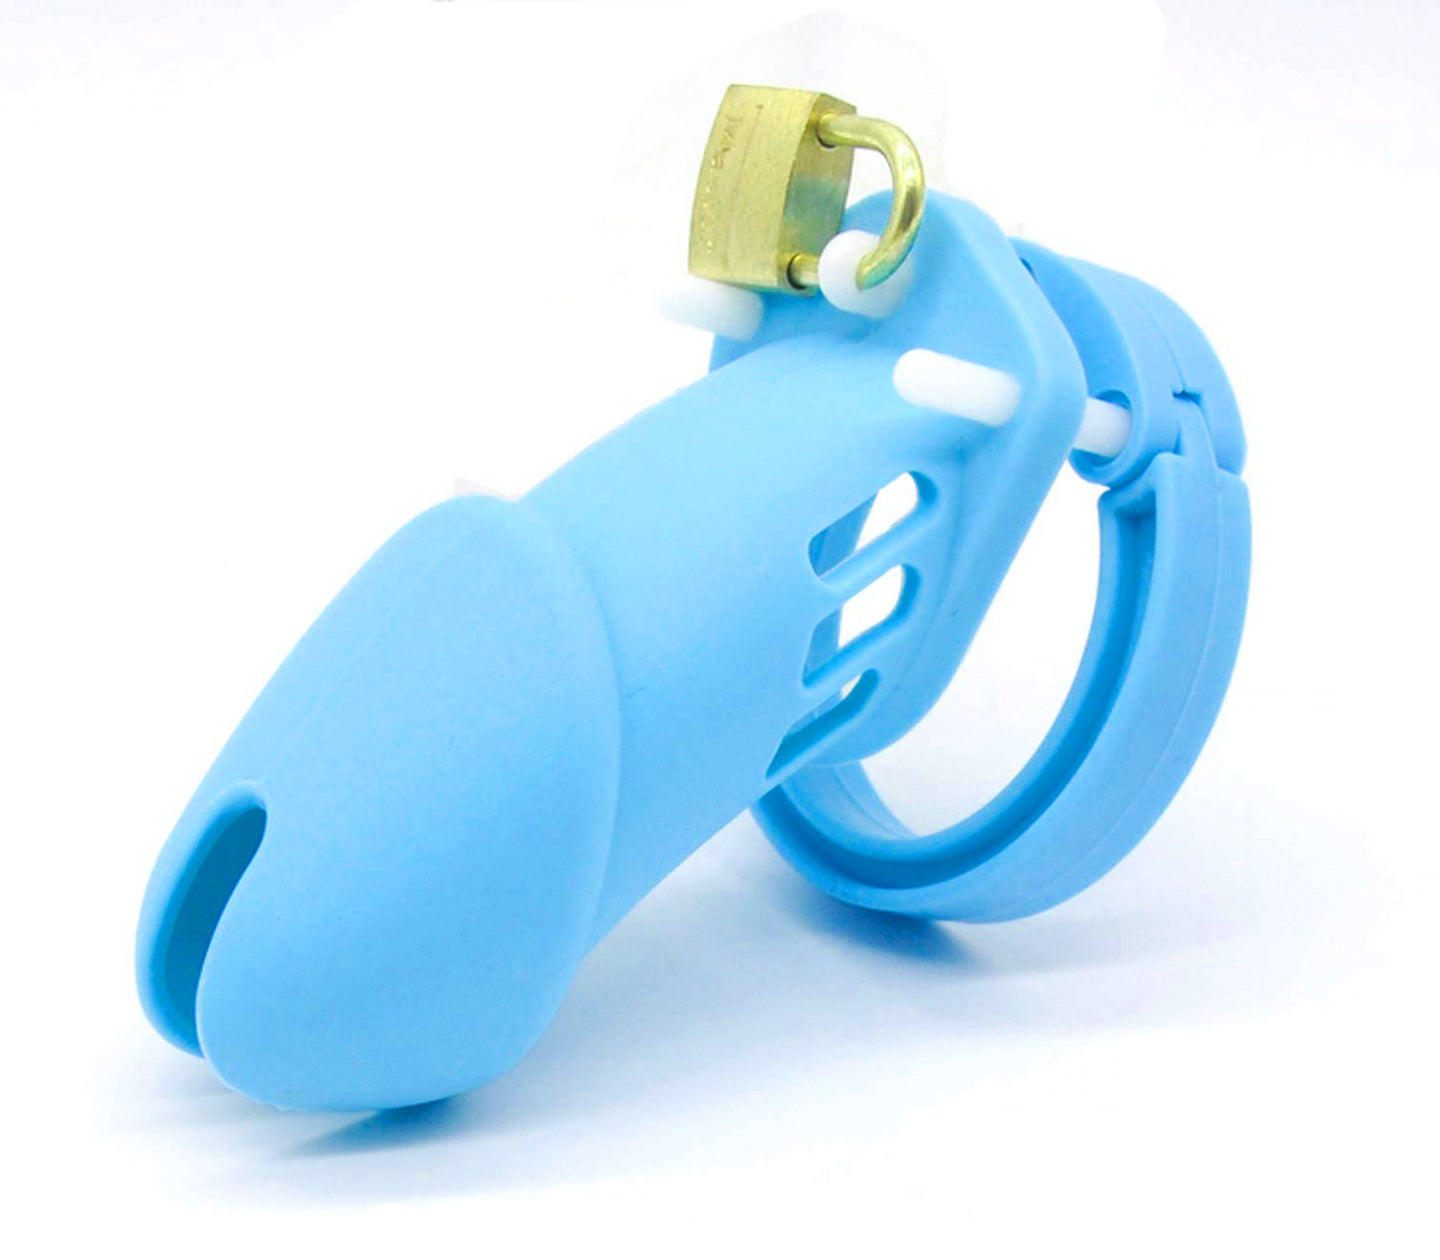 Lil Cockcage 009 Silicone Cock Cages W/ Interchangeable Rings Blue Long - Club X